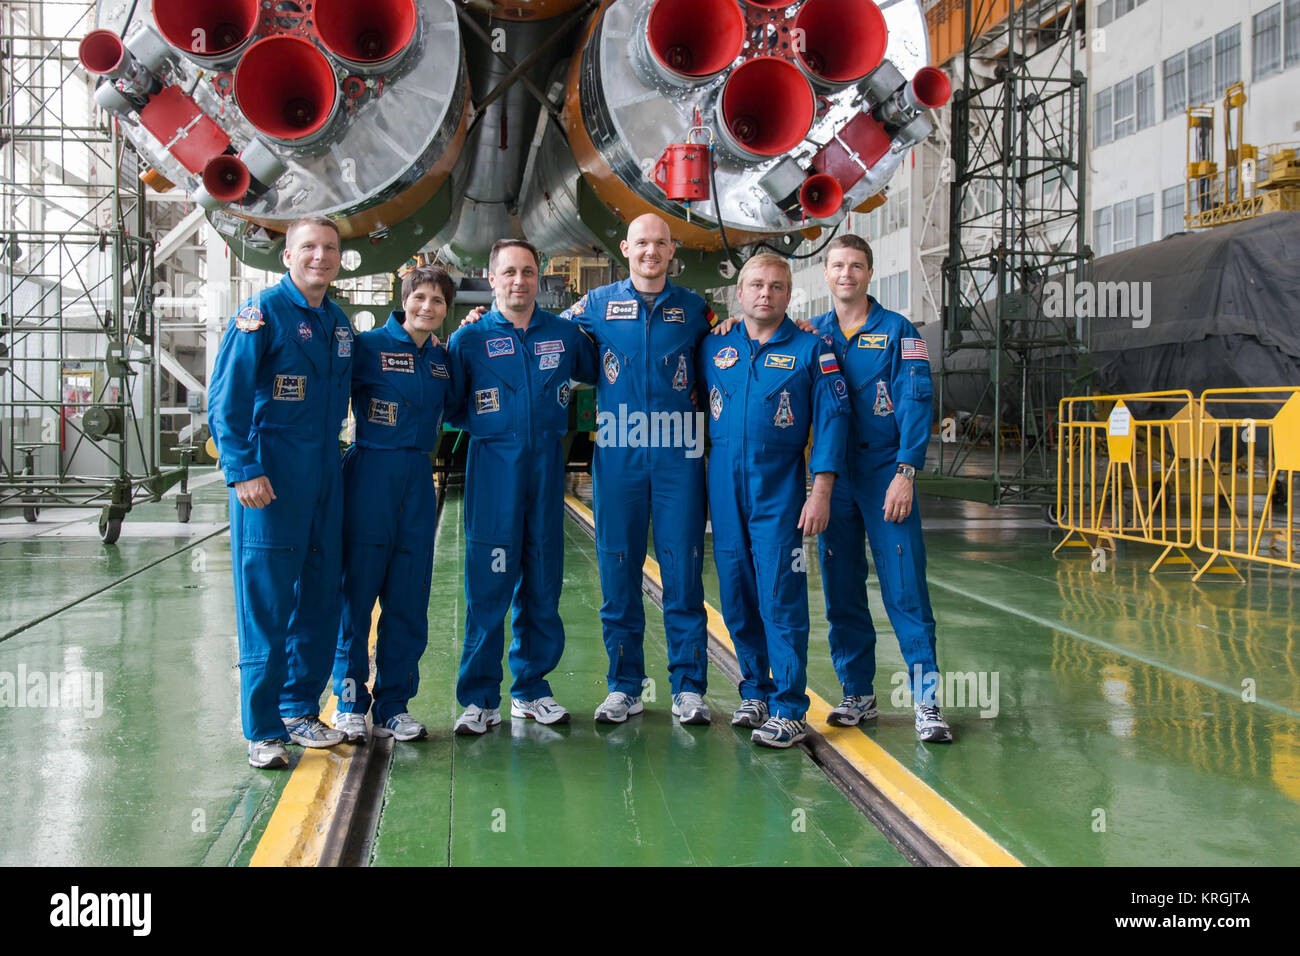 13-16-01-3:  At the Baikonur Cosmodrome in Kazakhstan, the Expedition 40/41 backup and prime crewmembers pose for pictures in front of the Soyuz booster rocket’s first stage engines May 24 during the final fit check training dress rehearsal. From left to right are backup crewmembers Terry Virts of NASA, Samantha Cristoforetti of the European Space Agency, Anton Shkaplerov of the Russian Federal Space Agency (Roscosmos), and prime crewmembers Flight Engineer Alexander Gerst of the European Space Agency, Soyuz Commander Max Suraev of Roscosmos and Flight Engineer Reid Wiseman of NASA. Gerst, Sur Stock Photo